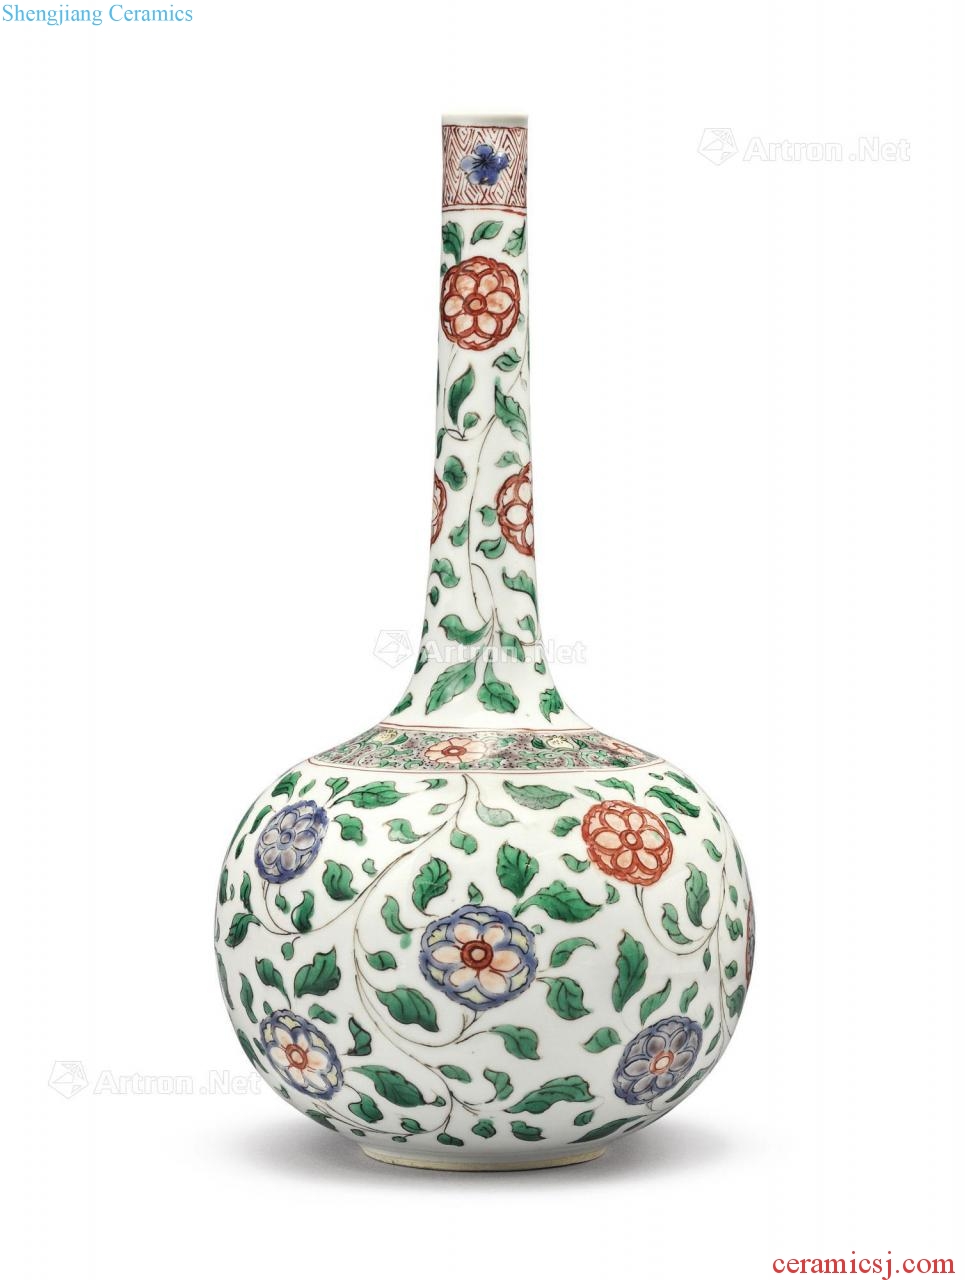 The qing emperor kangxi Colorful branch group pattern the flask